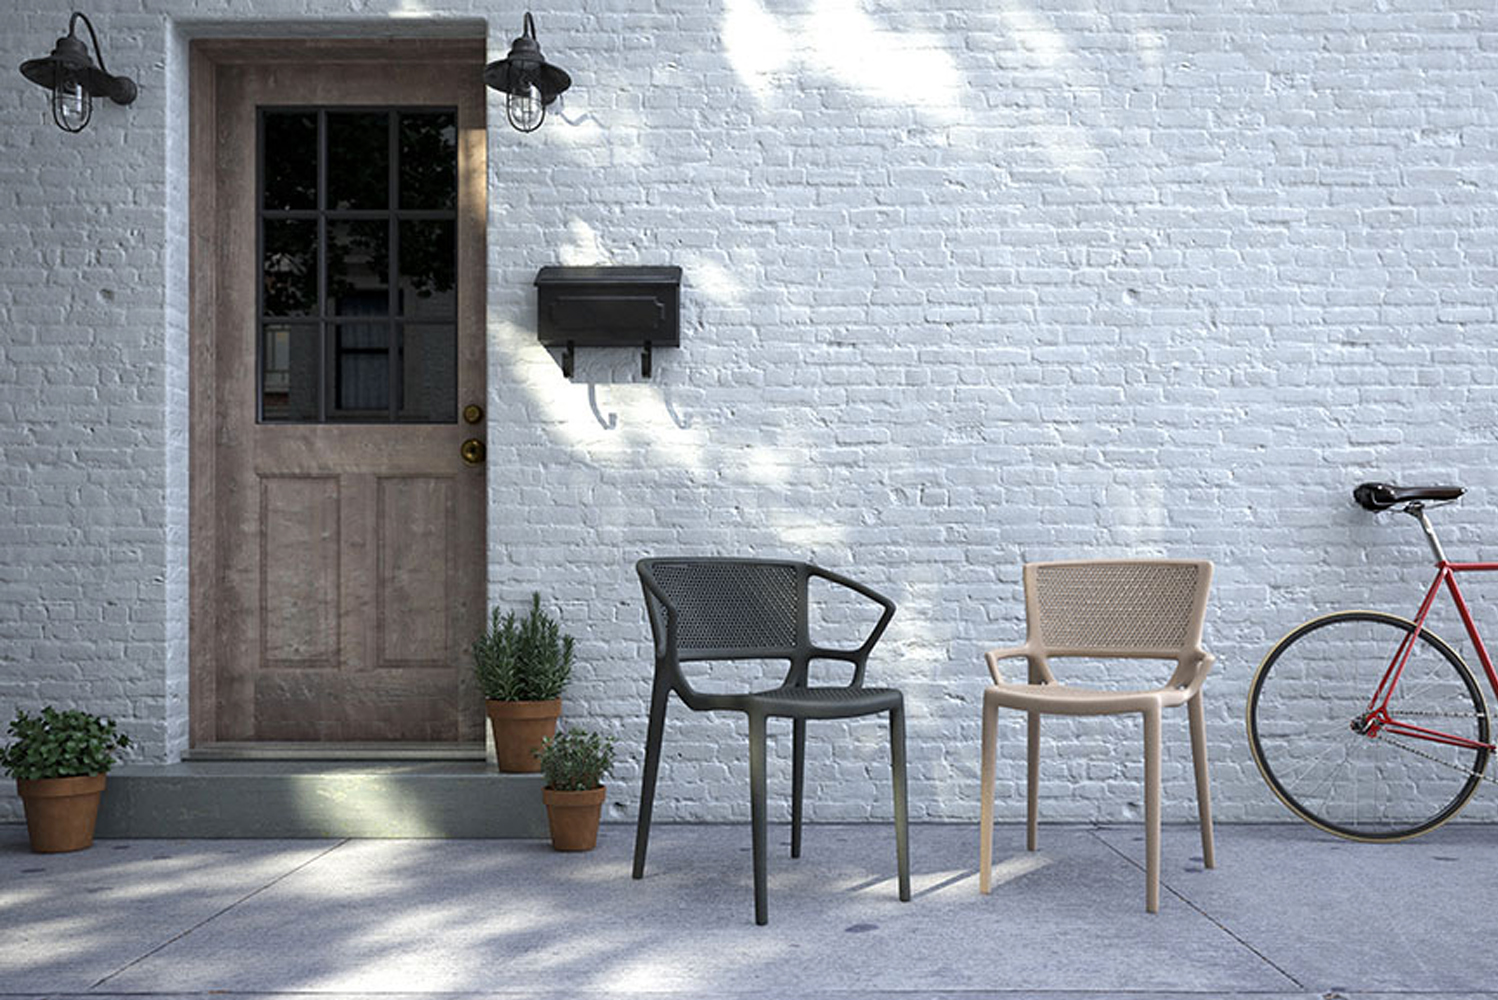 Community Furniture launched Florette an indoor-outdoor stackable seating ideal for hospitality venues 